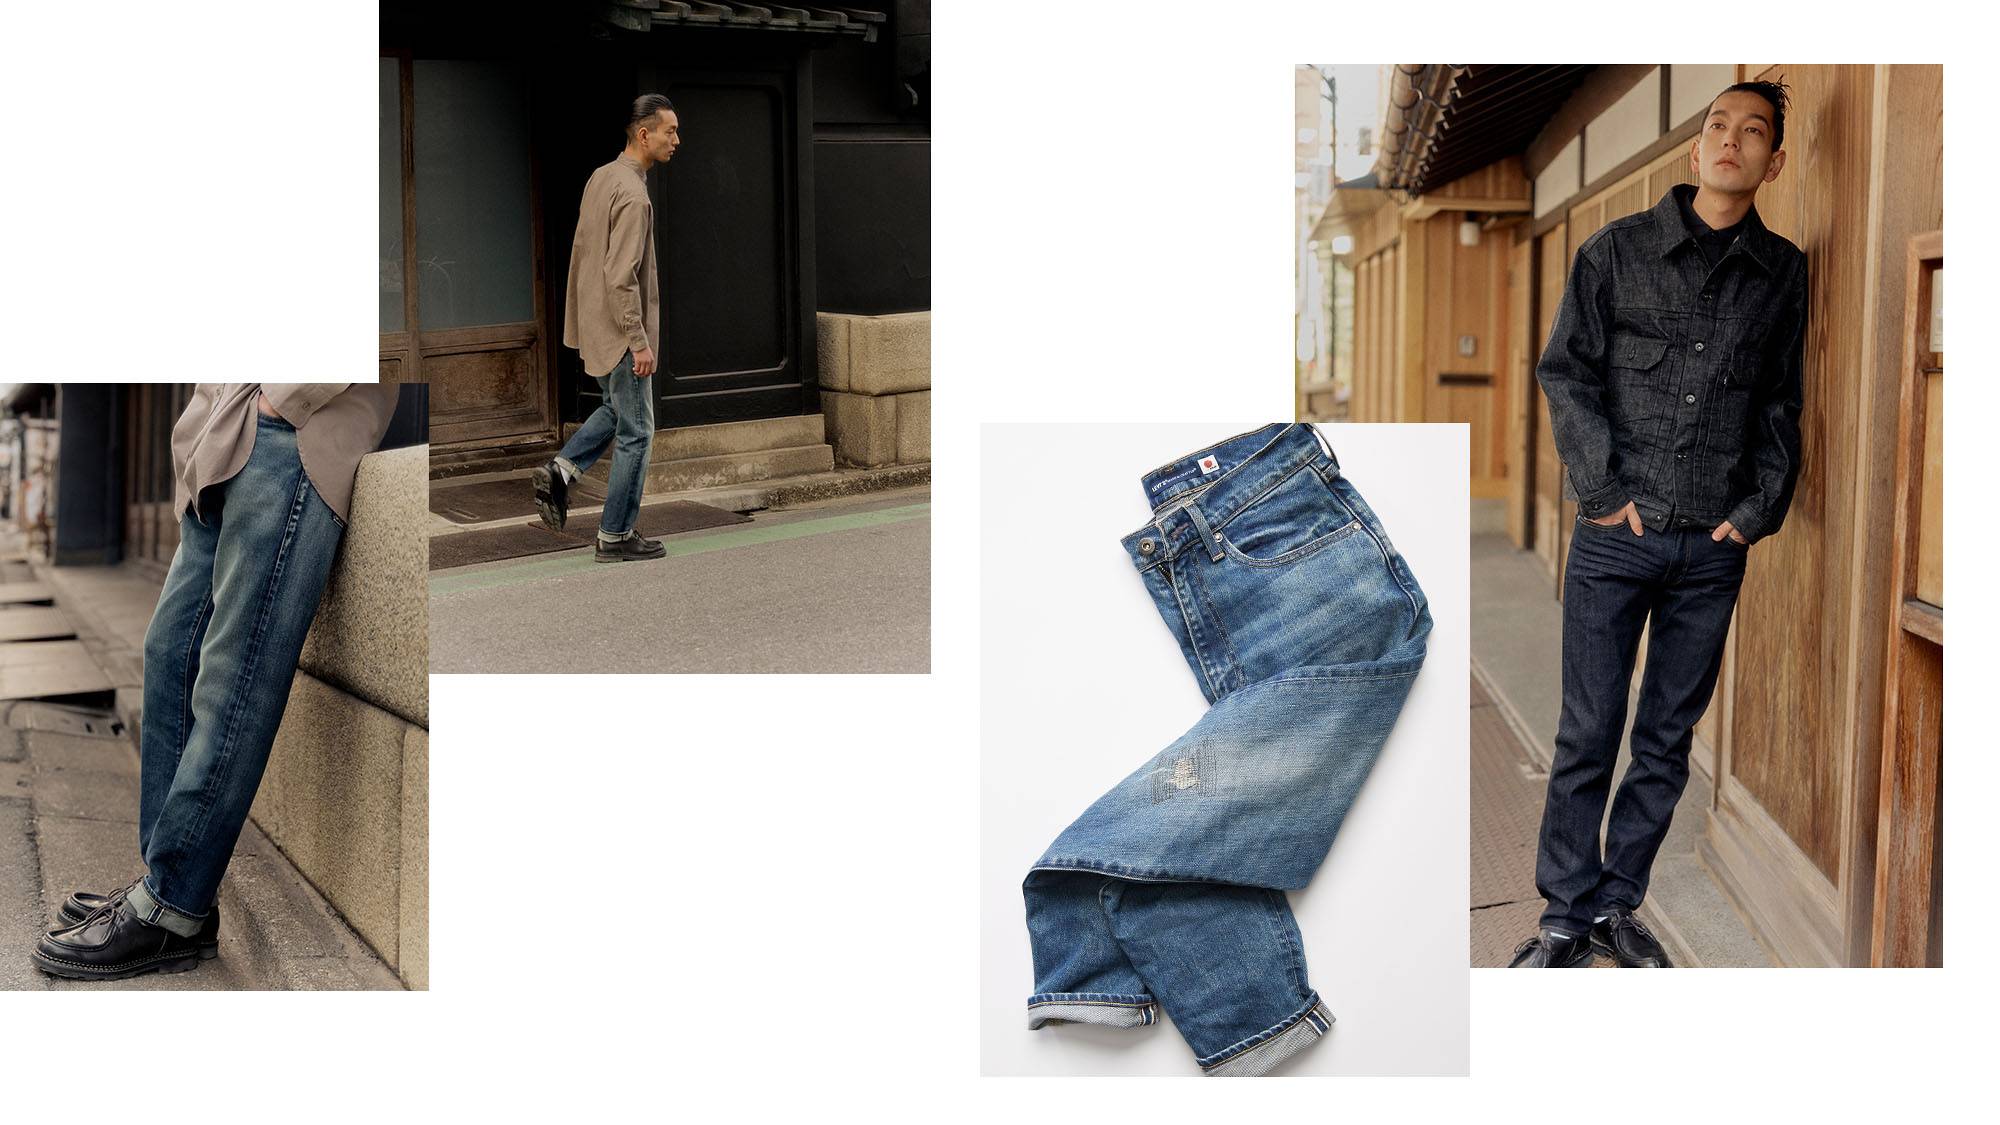 Levis® Made in Japan dark-wash selvedge denim styled on male model in beige button up long sleeve top with tucked in pant legs. He is also styled in a dark grey selvedge denim jacket and dark-wash selvedge jeans.